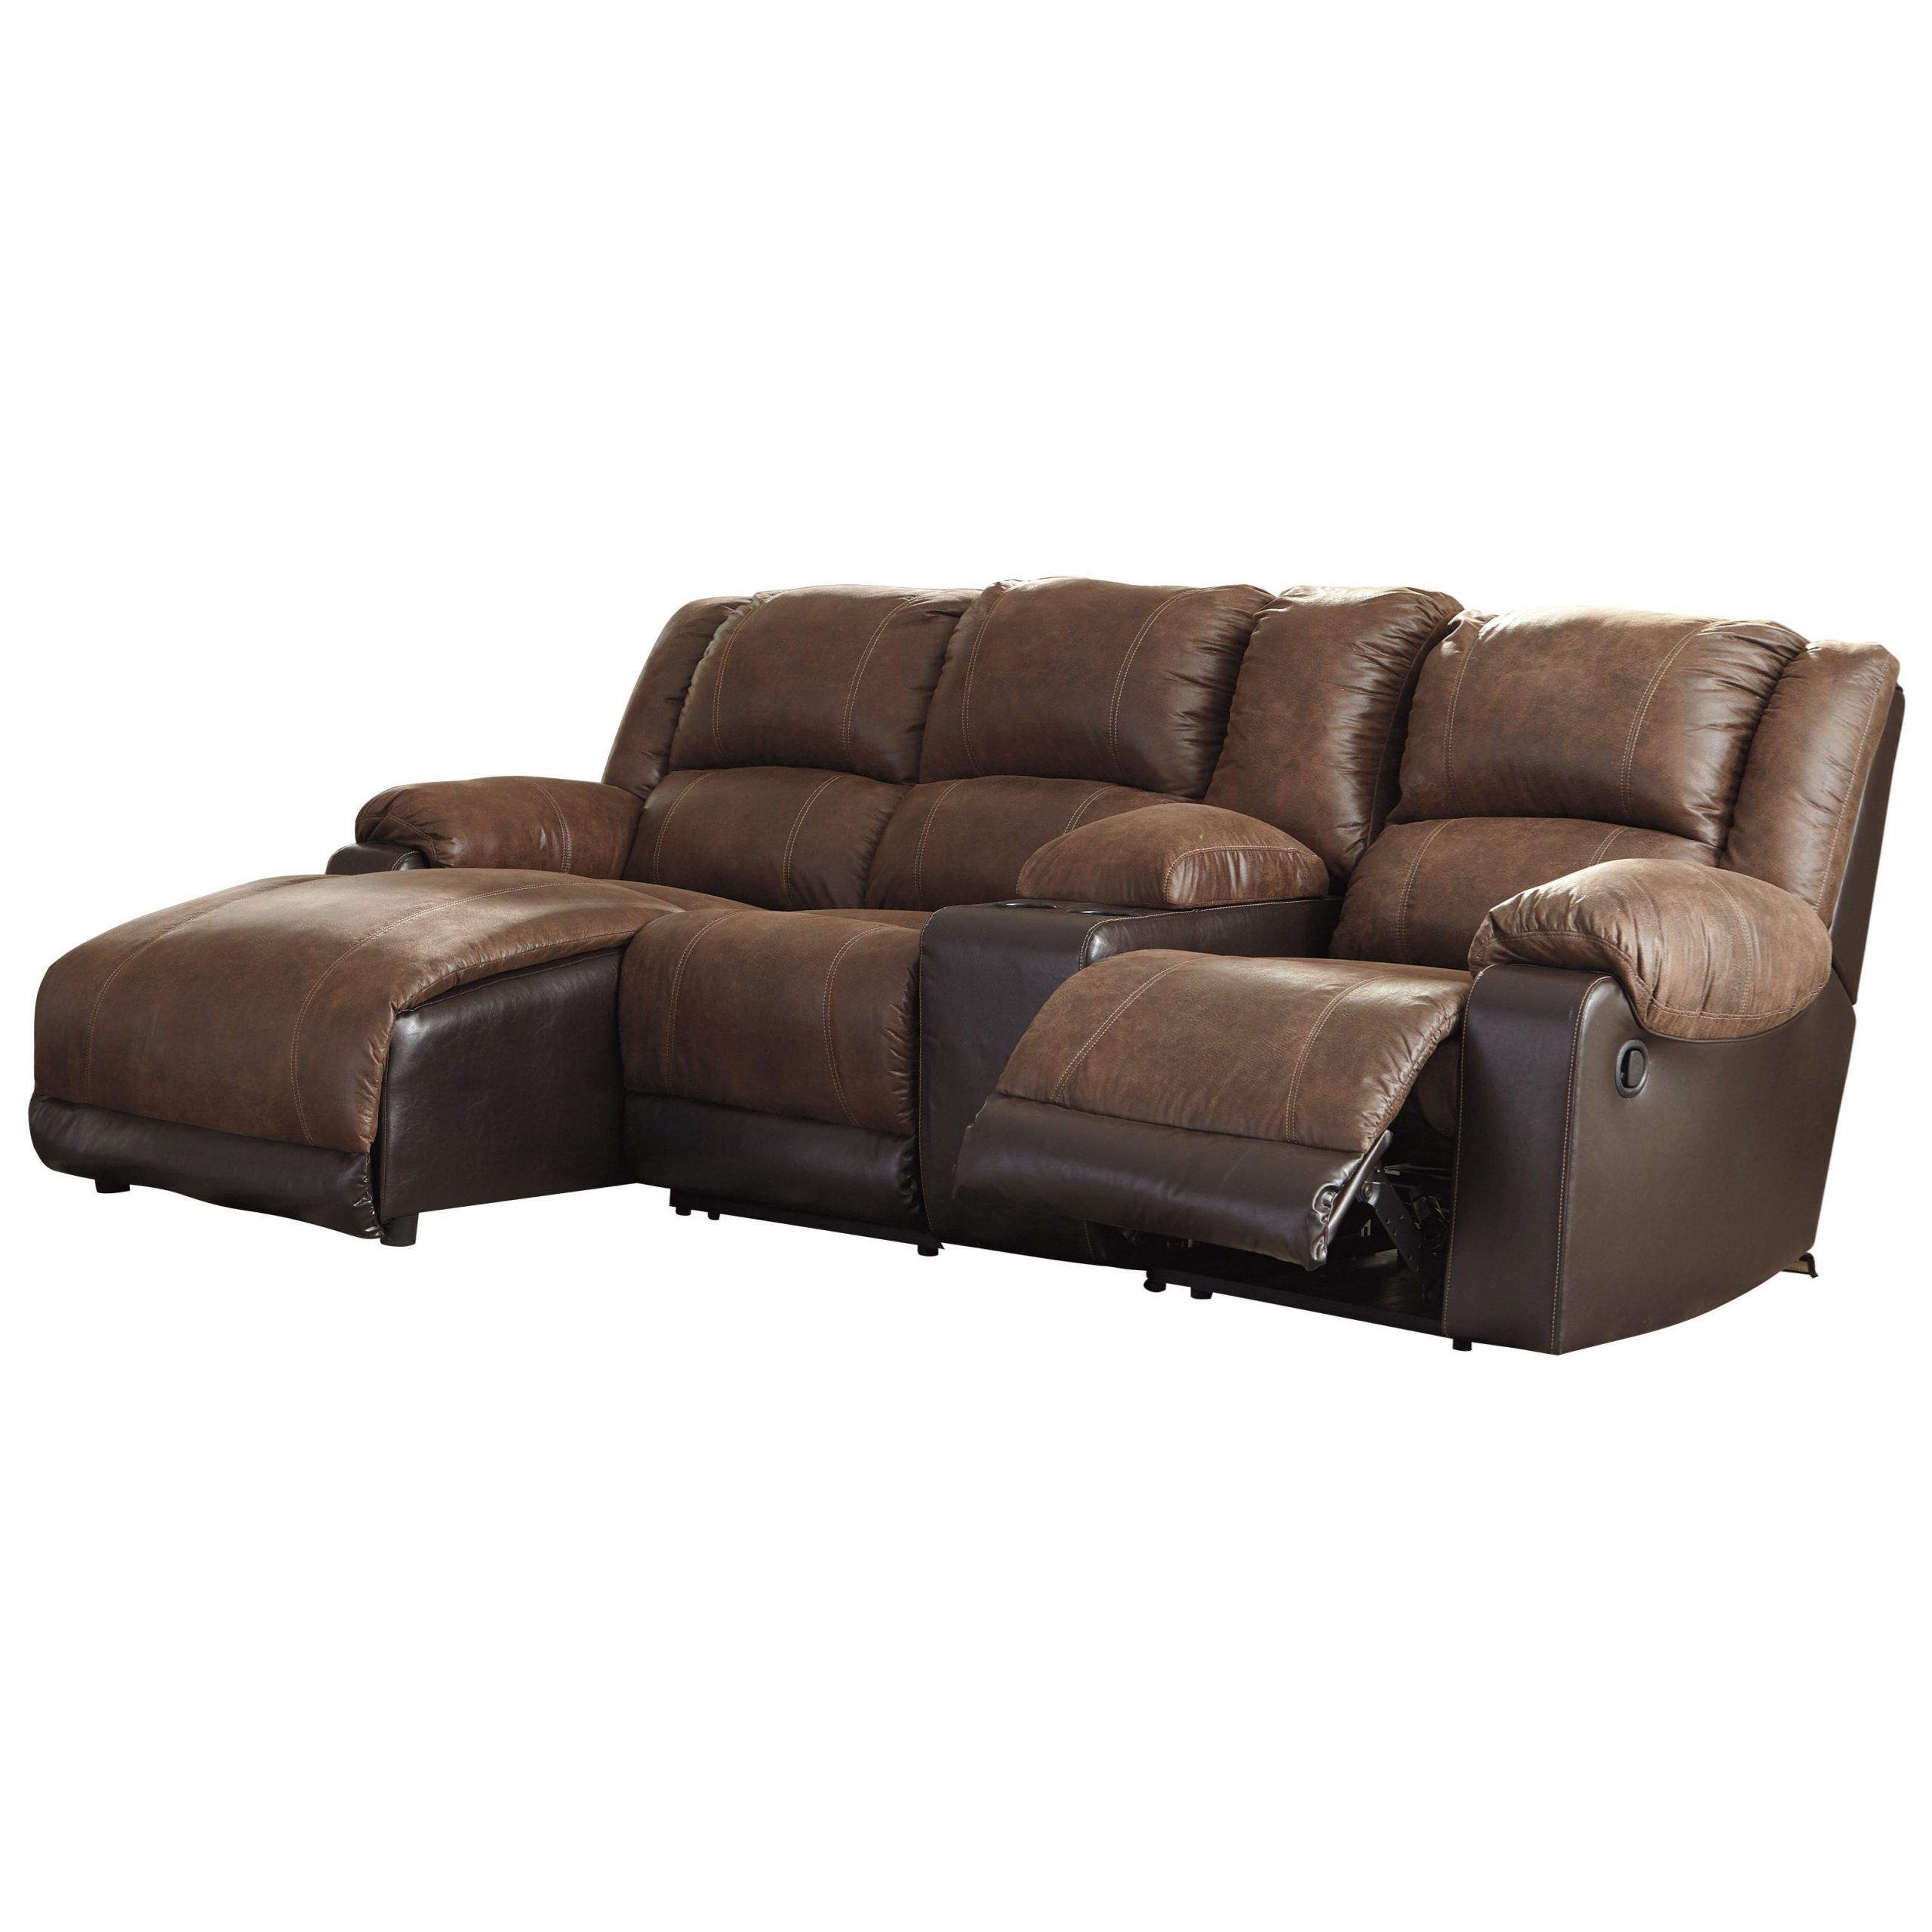 Signature Designashley Nantahala Reclining Chaise Sofa Intended For Celine Sectional Futon Sofas With Storage Reclining Couch Scaled 